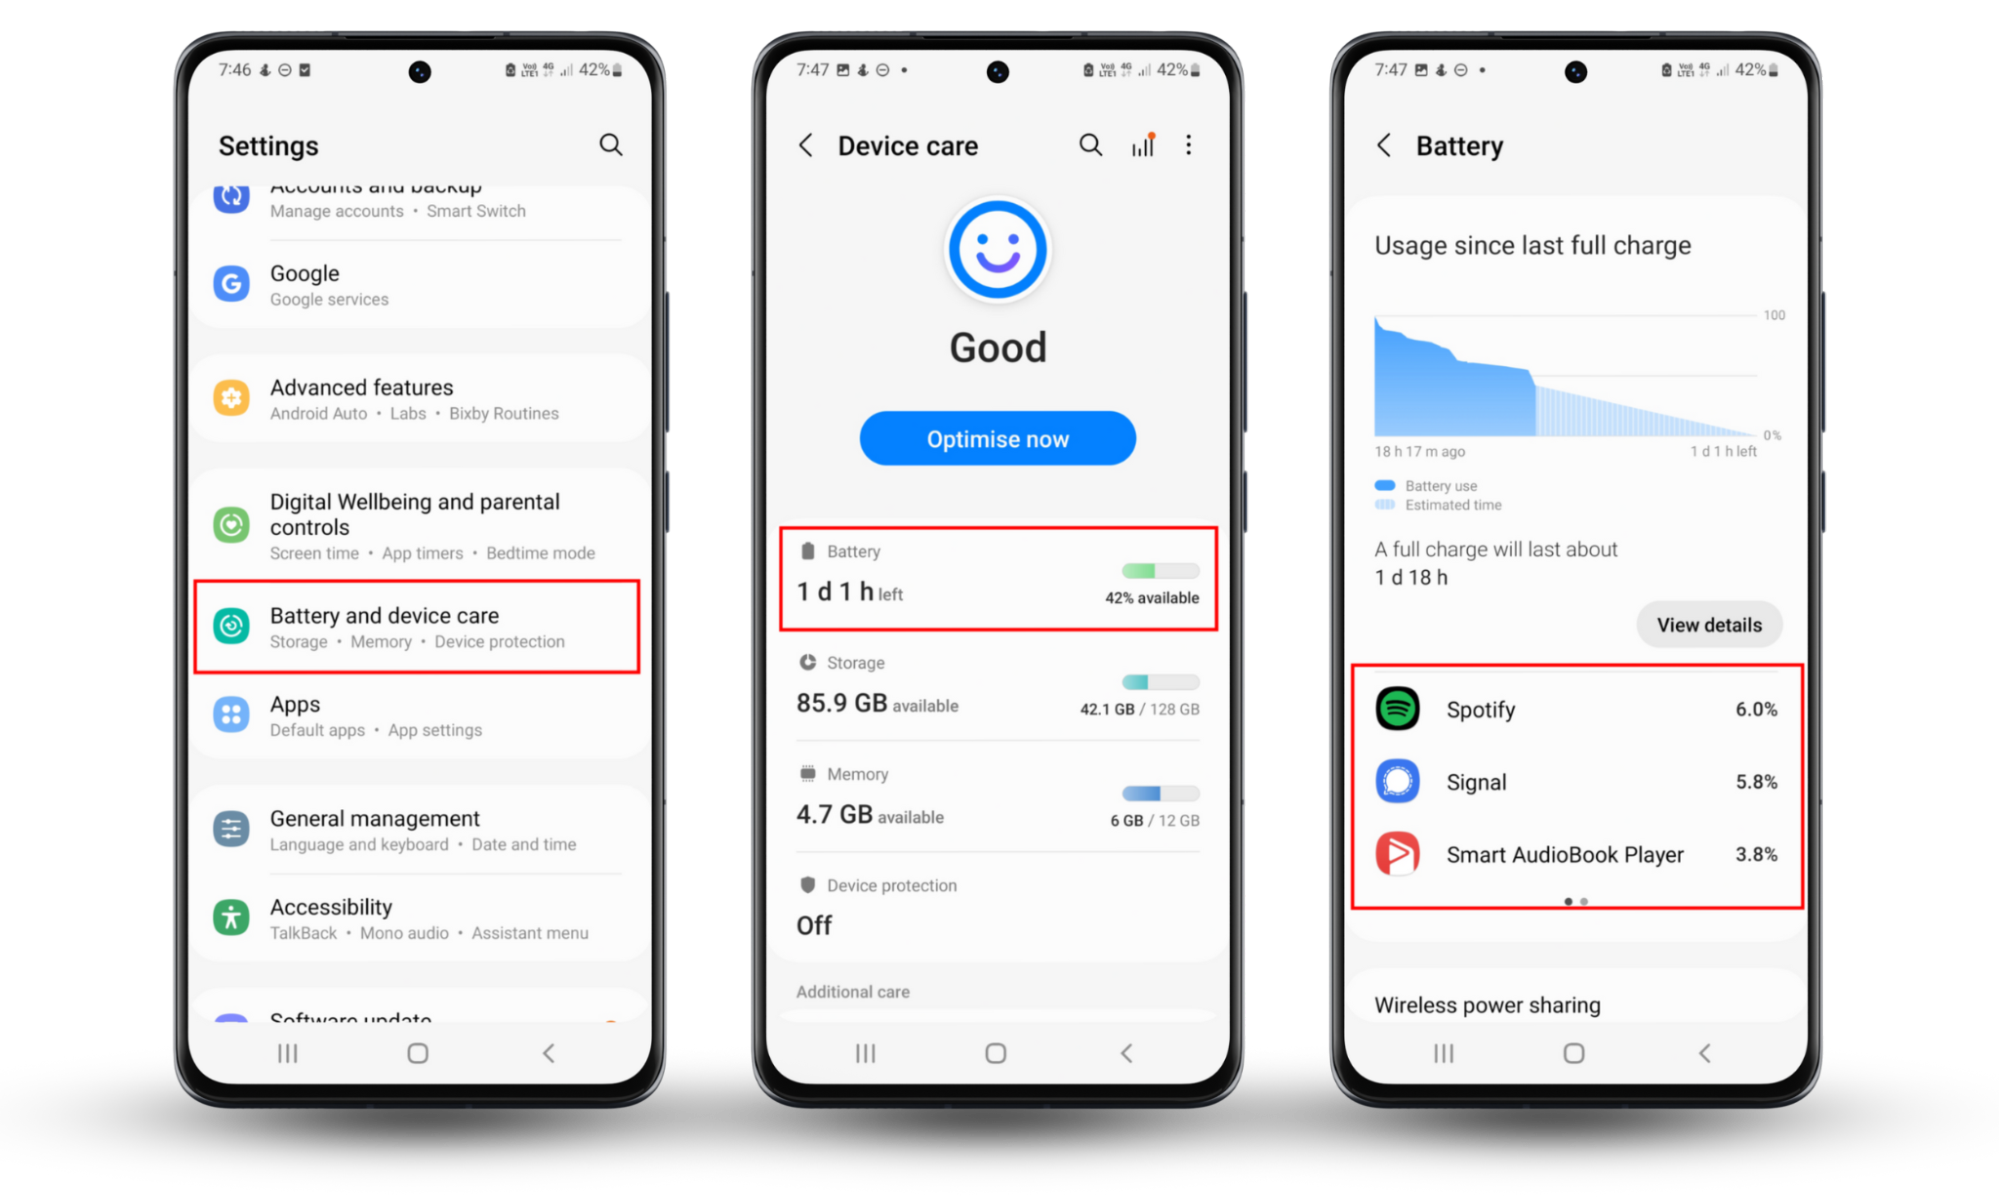 Battery problems are a sign that your phone is tapped. On an Android device, head to Settings > Battery and Device Care > Battery to see which apps use the most of your battery.